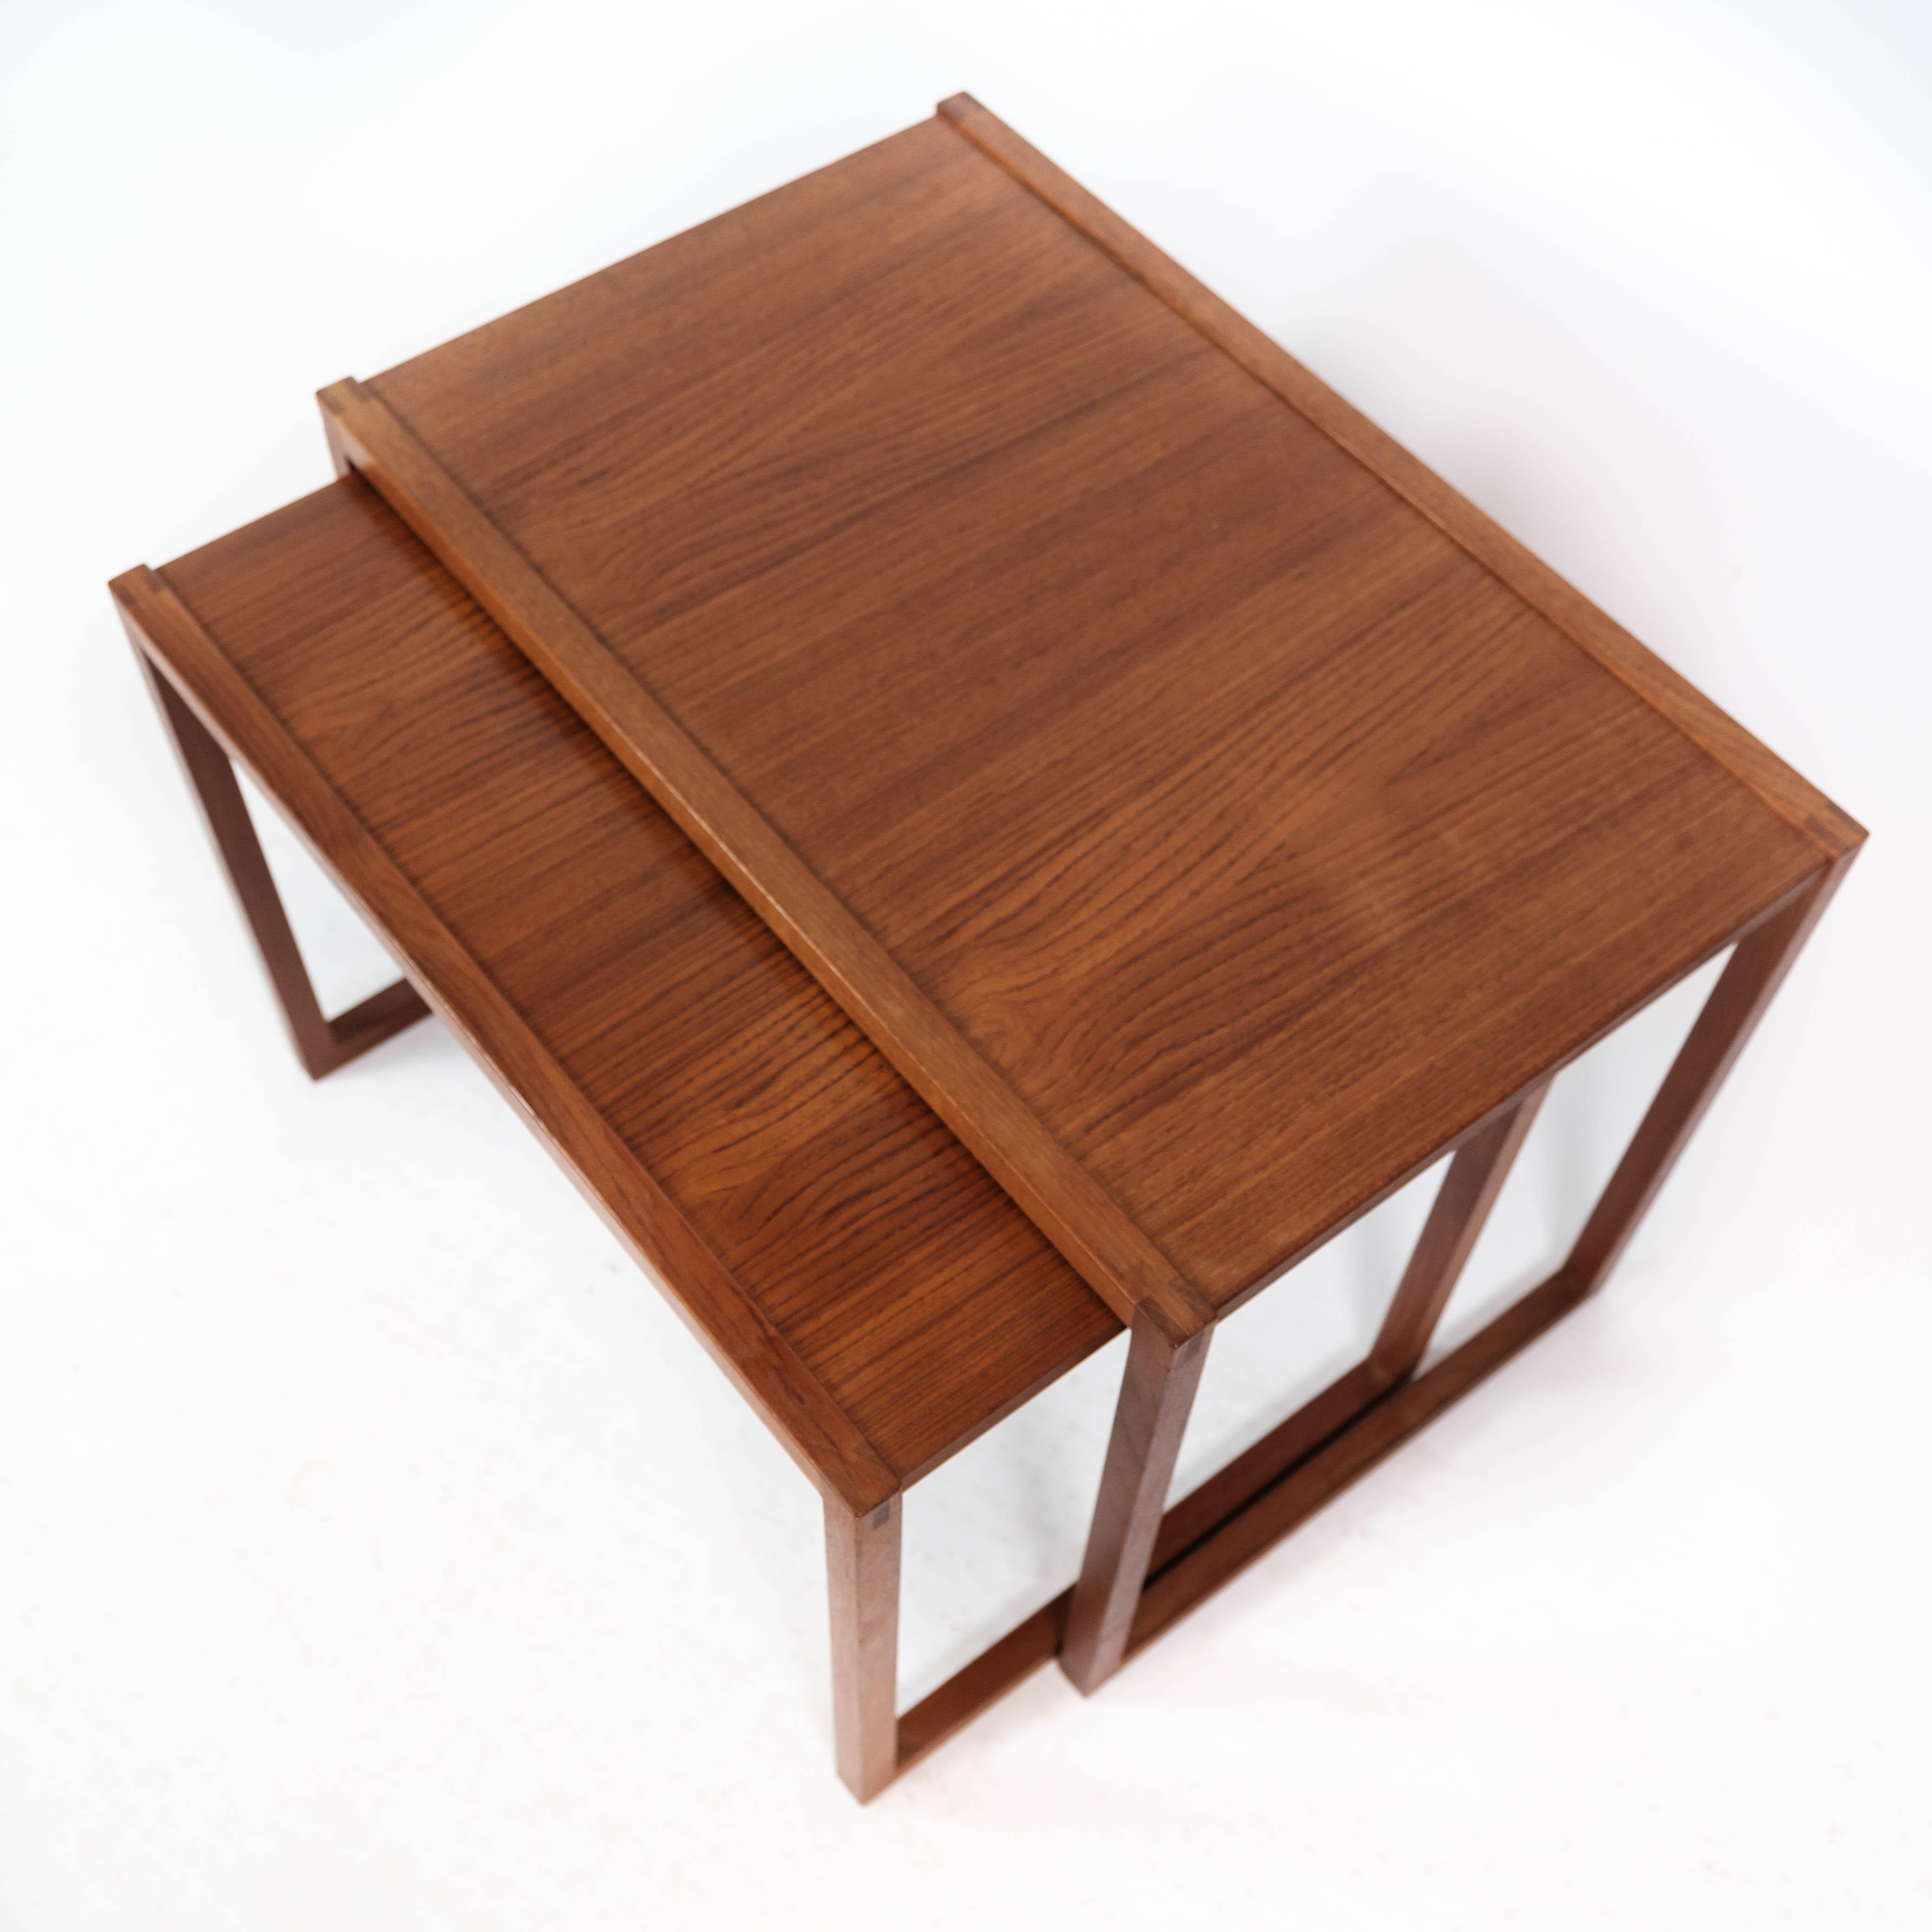 Mid-20th Century Nesting Table in Teak of Danish Design from the 1960s For Sale